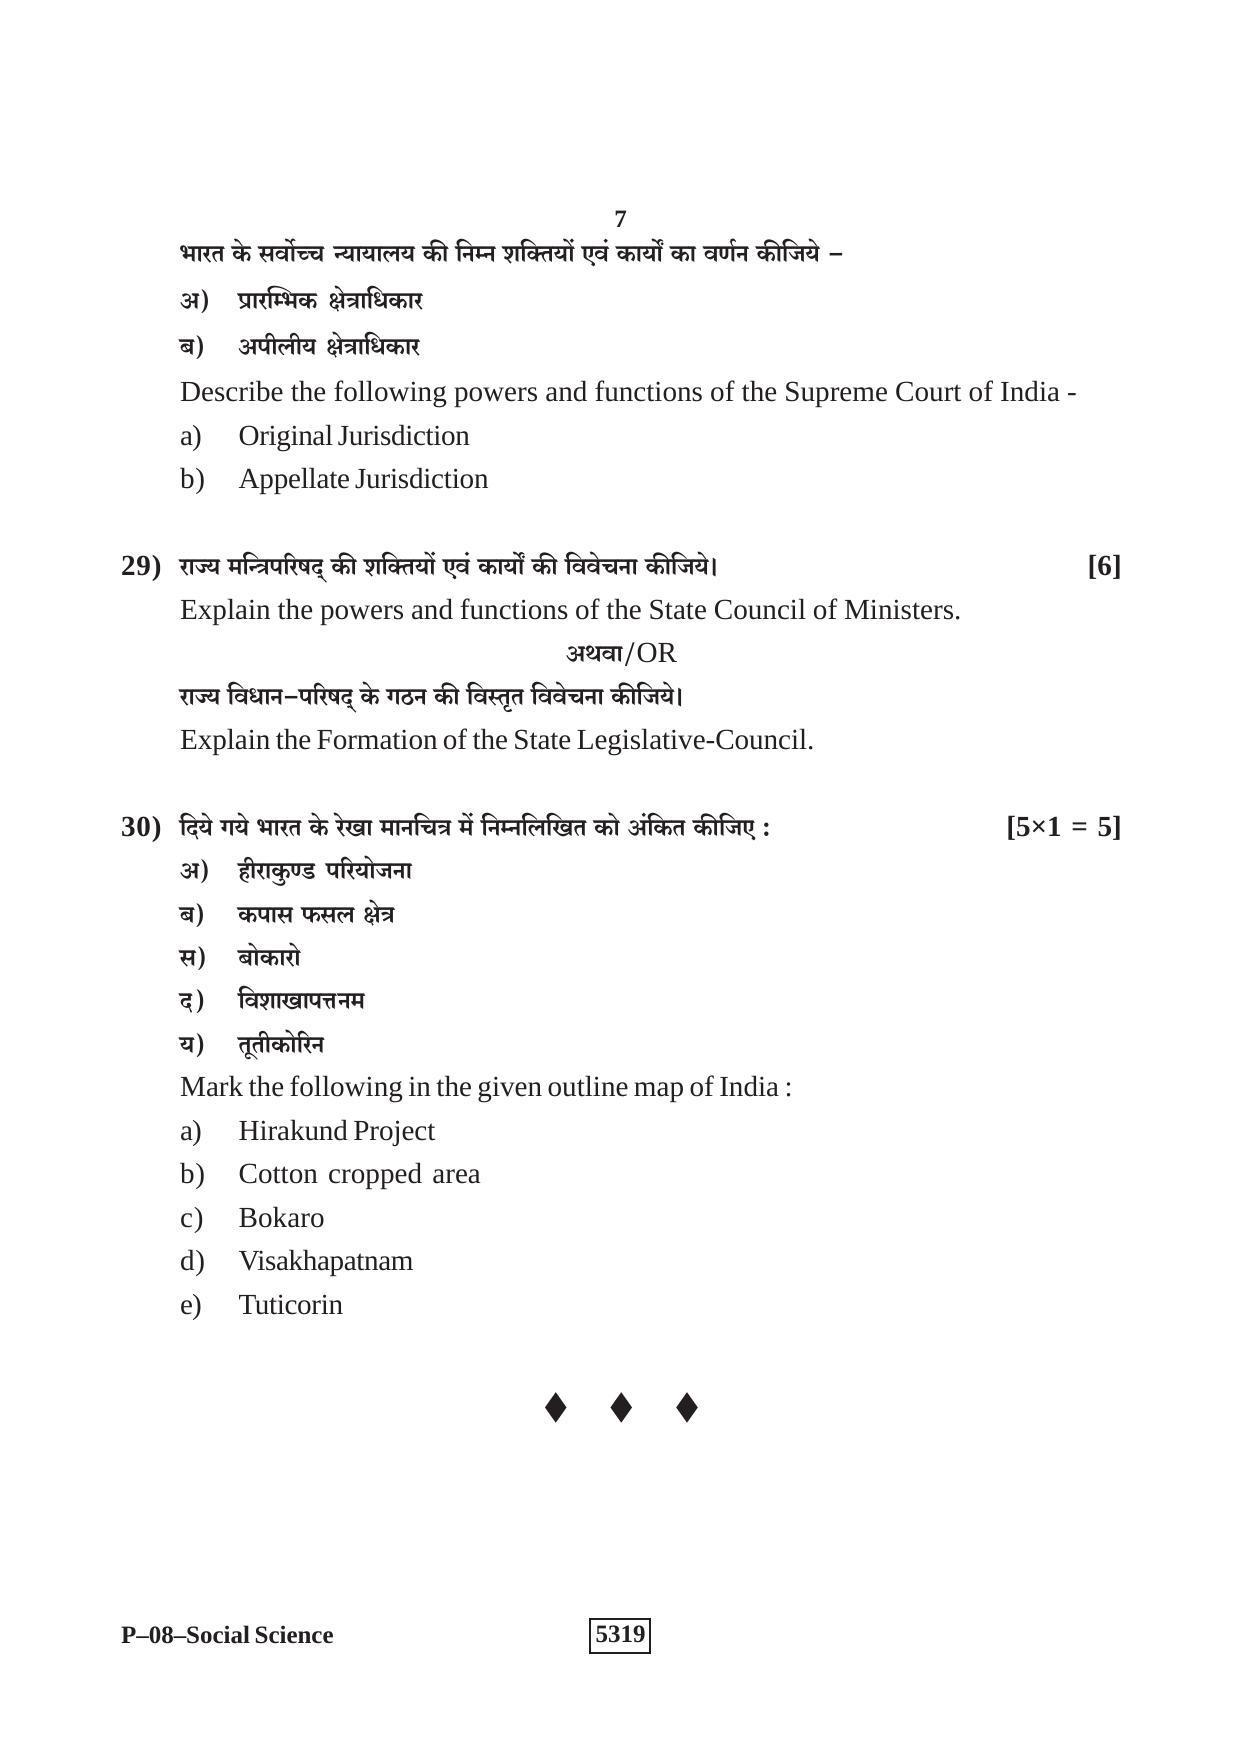 RBSE 2020 Social Science Praveshika Question Paper - Page 7